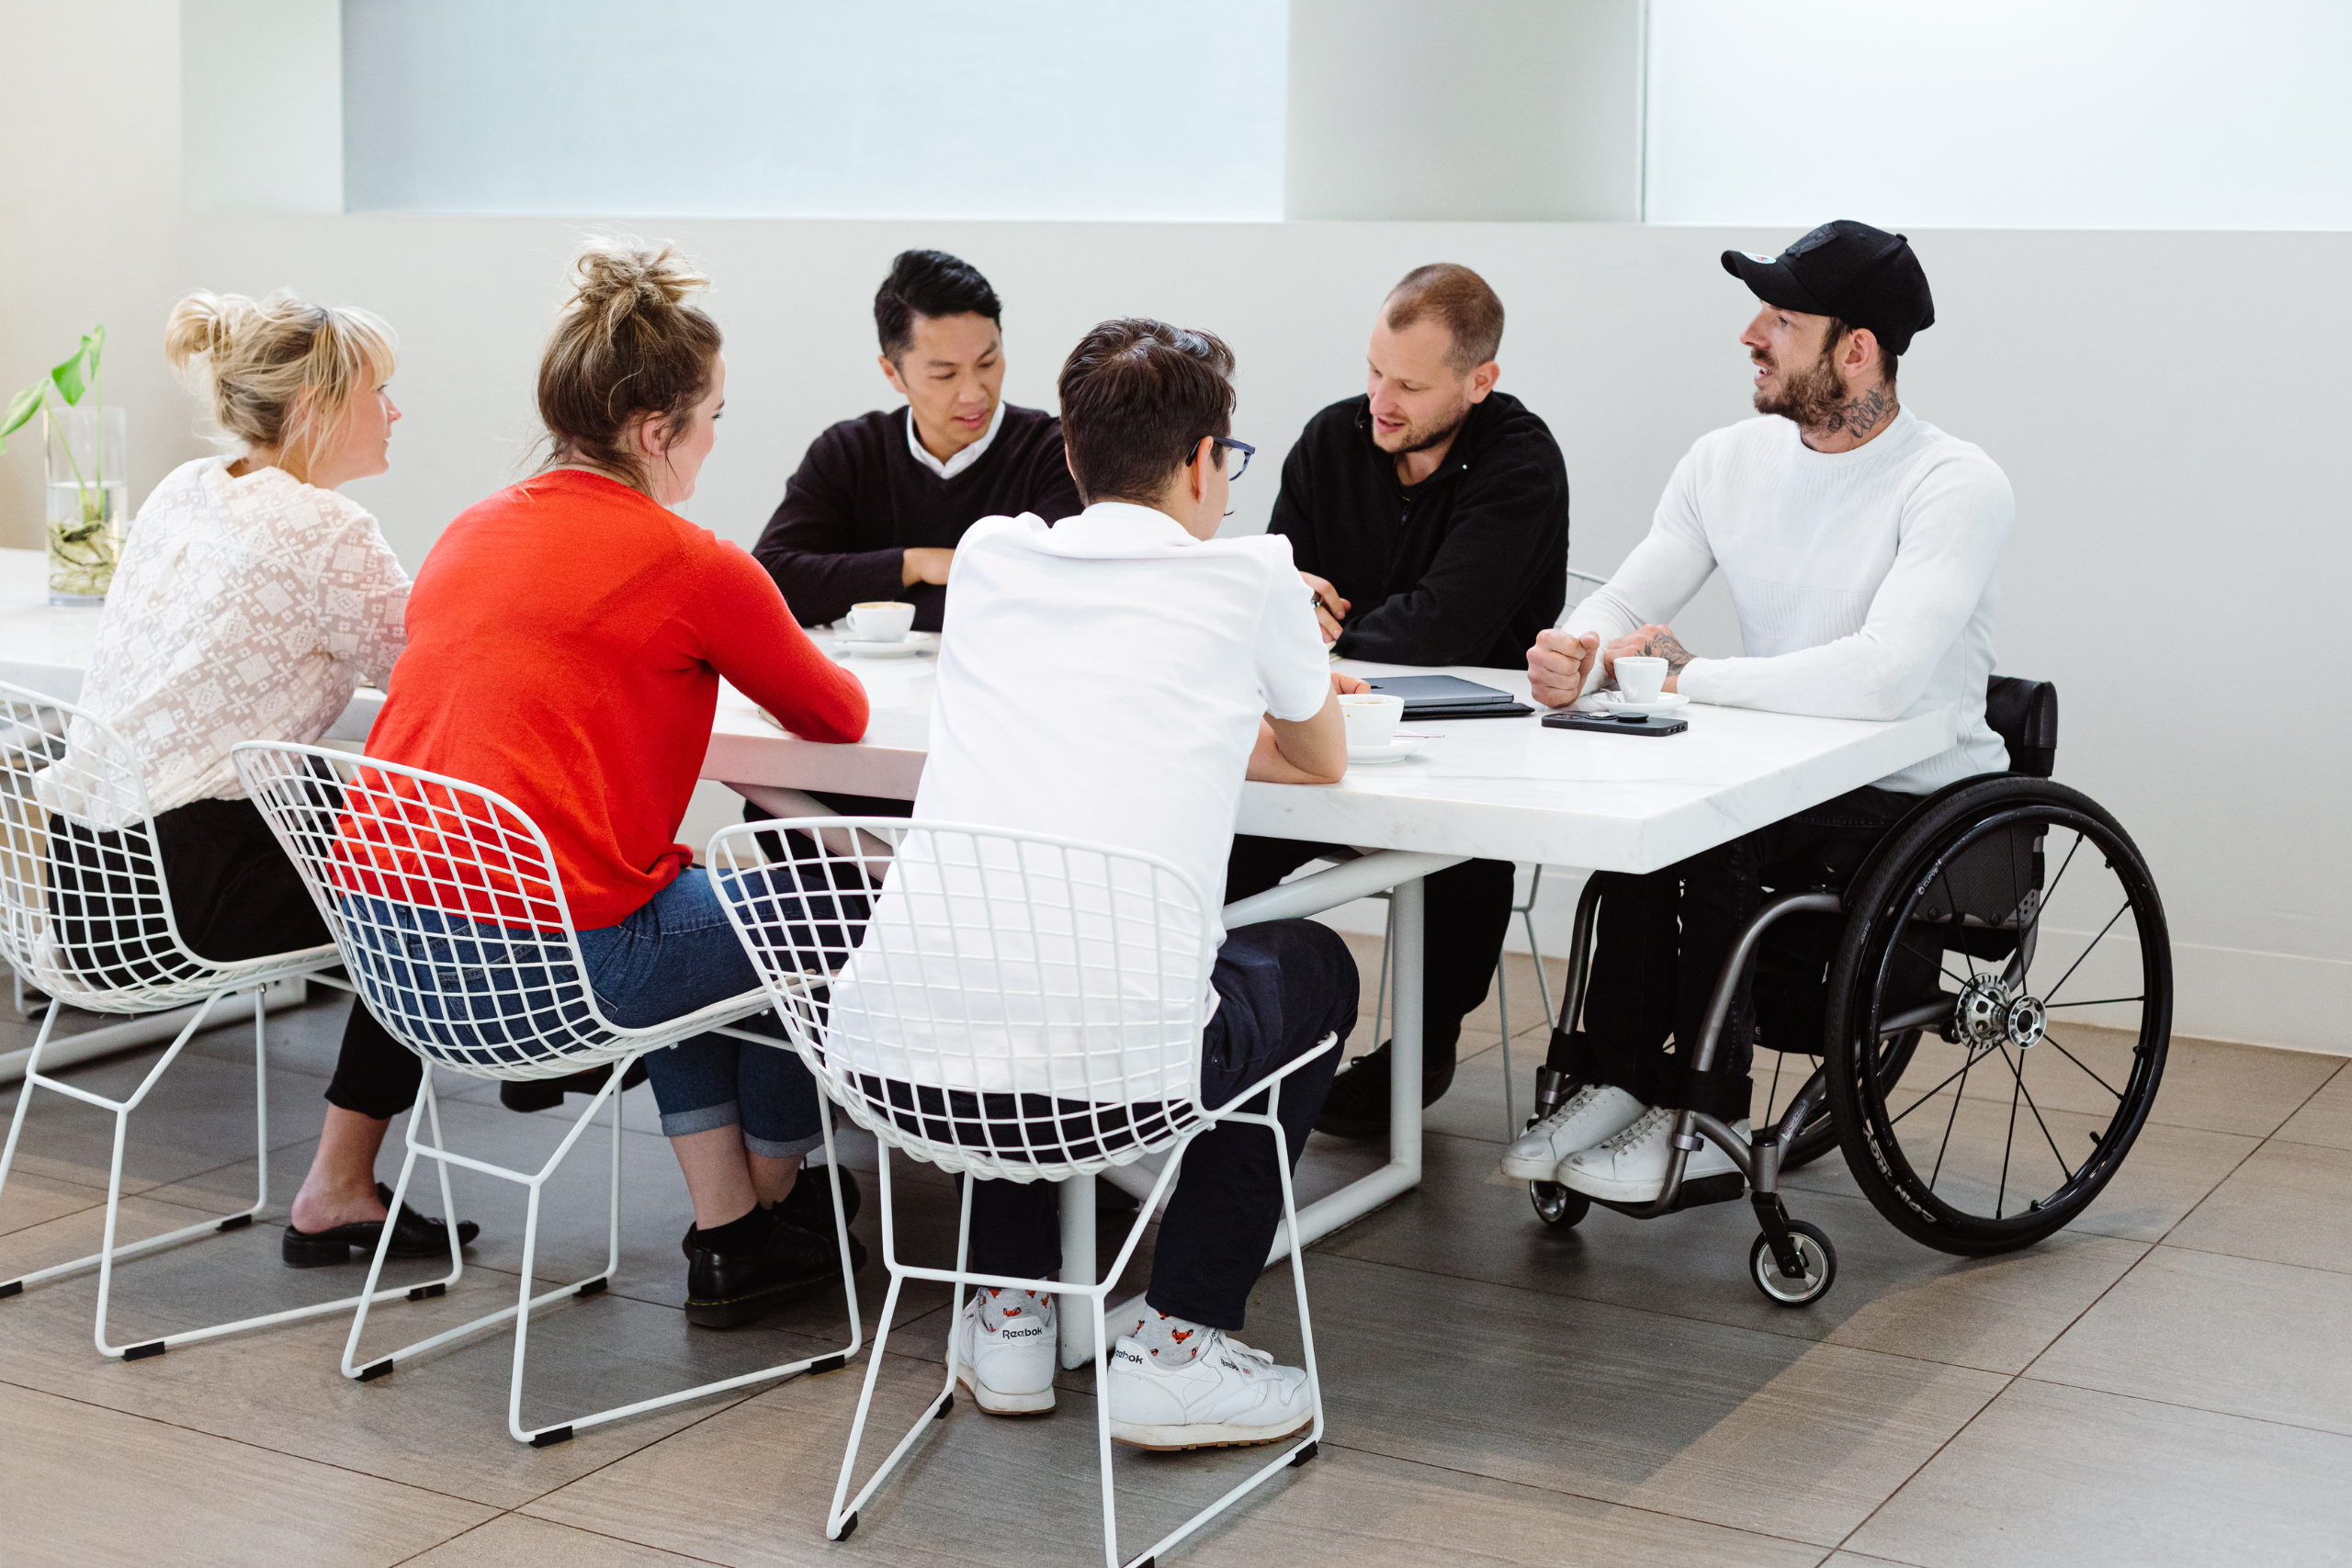 In a meeting room, people are seated around a table, engaged in conversation. At the end of the table, one person is using a wheelchair.